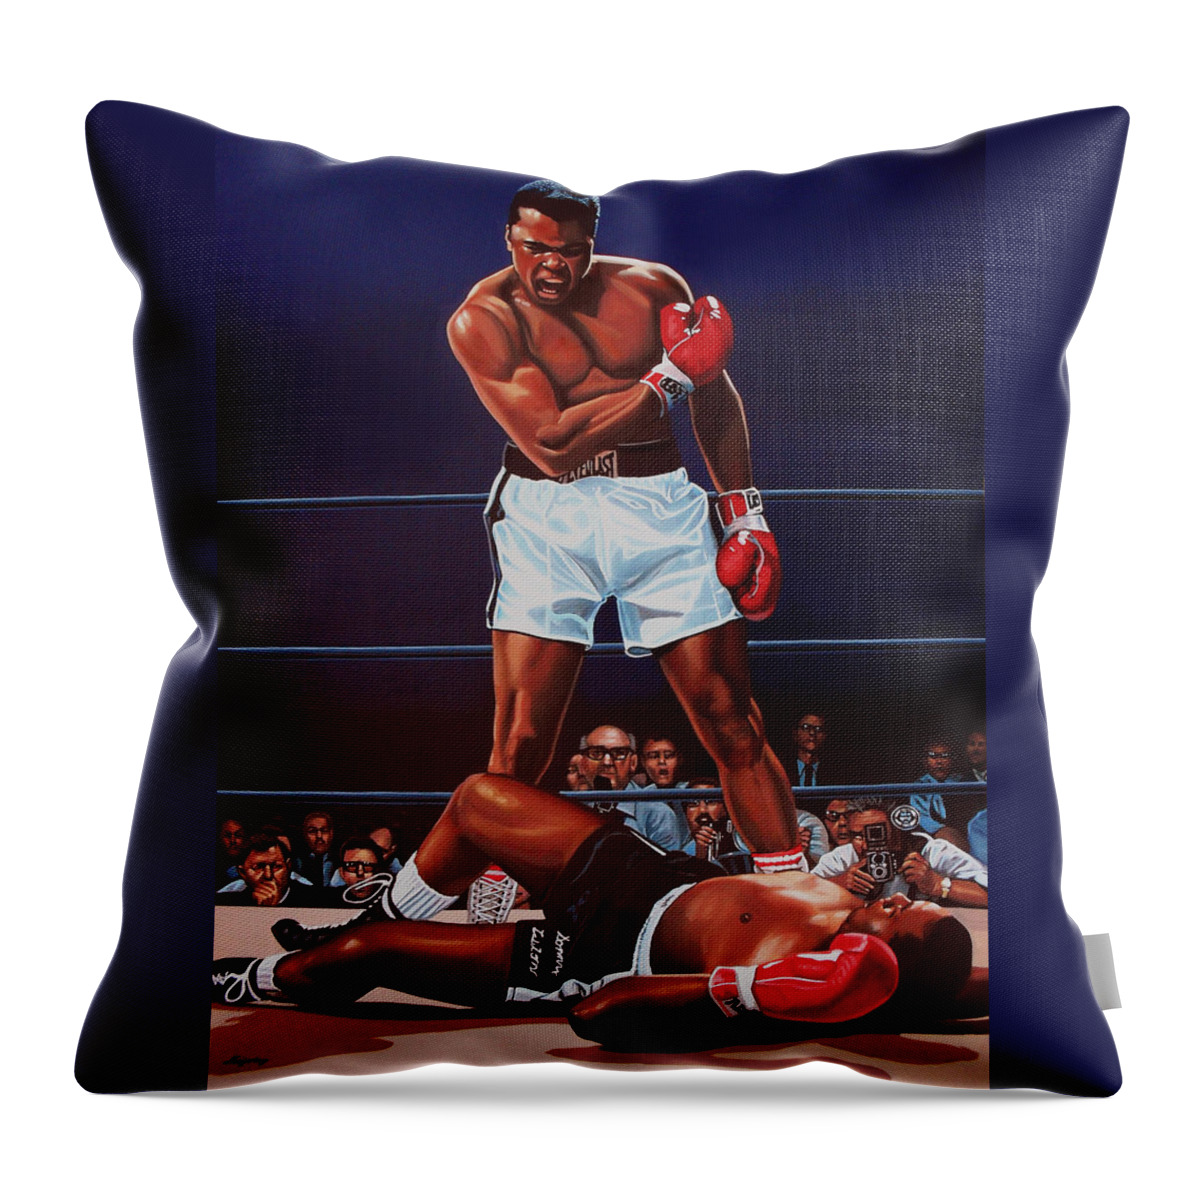 Mohammed Ali Versus Sonny Liston Throw Pillow featuring the painting Muhammad Ali versus Sonny Liston by Paul Meijering